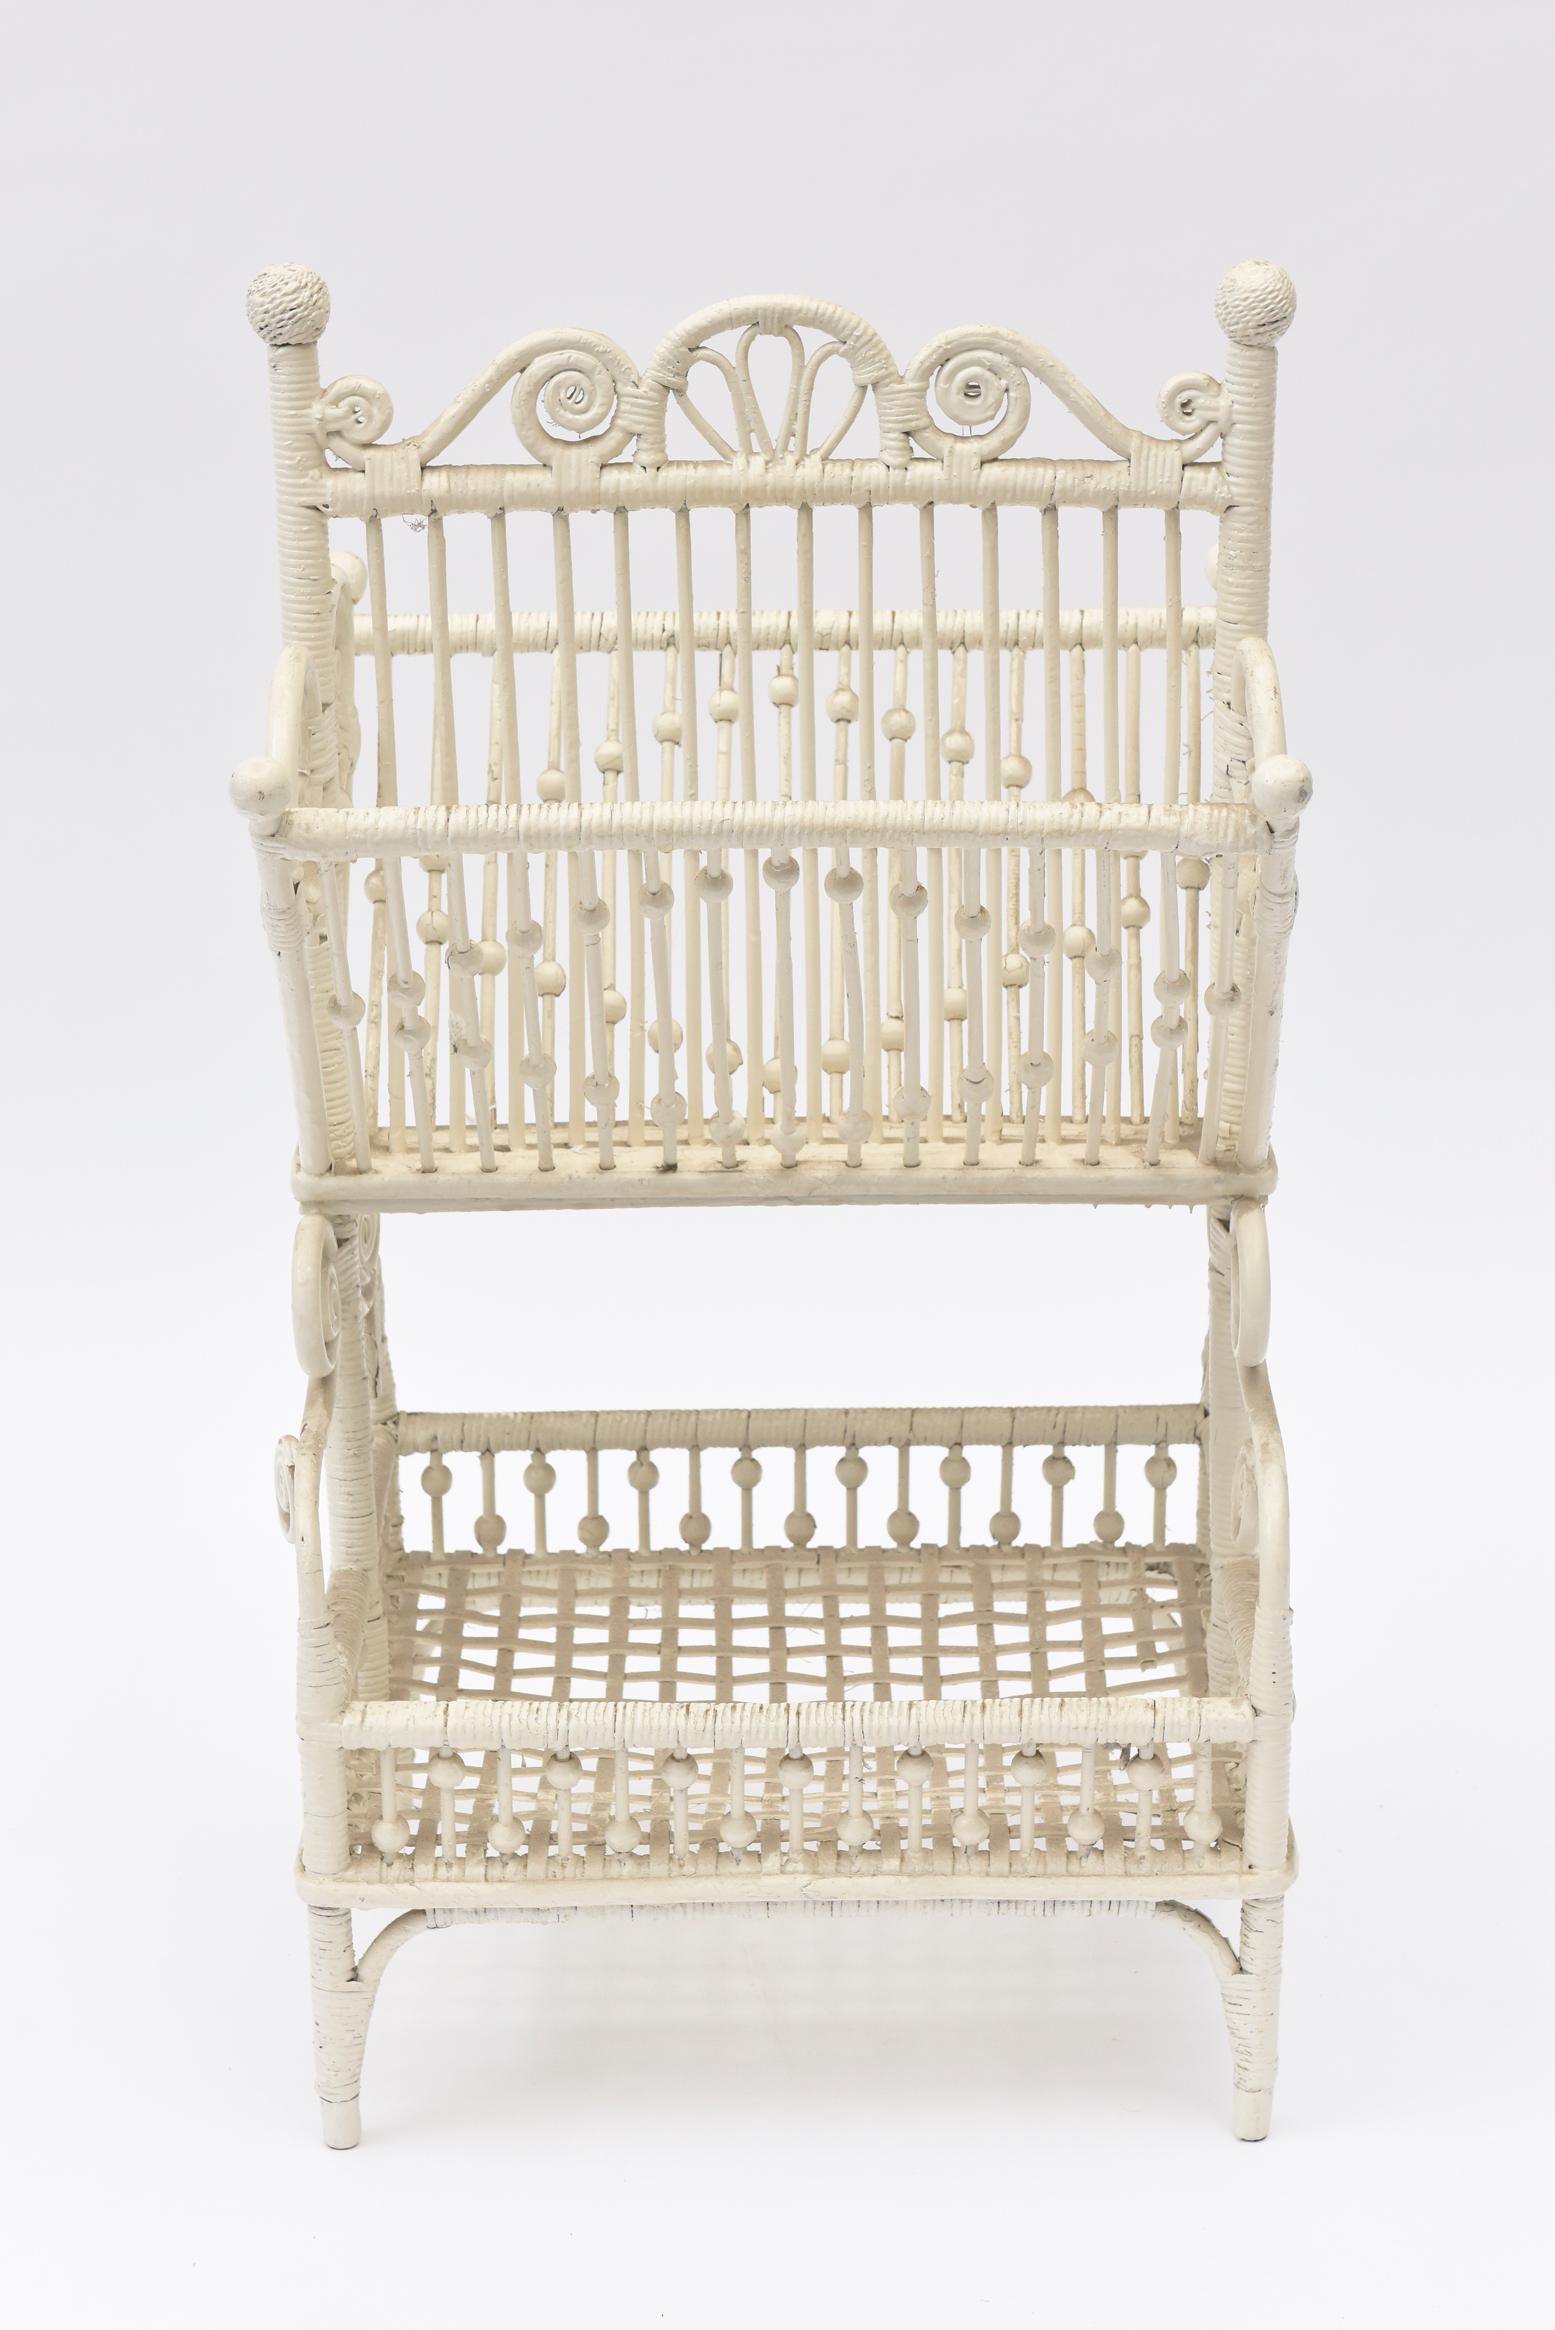 Rare two tier beaded High Victorian Magazine rack with curlicues, pinwheel sides and woven ball tops. The bottom of this exceptional piece is an open basket weave with bead and stick sides on all sides, the top two forming diamond shape beading